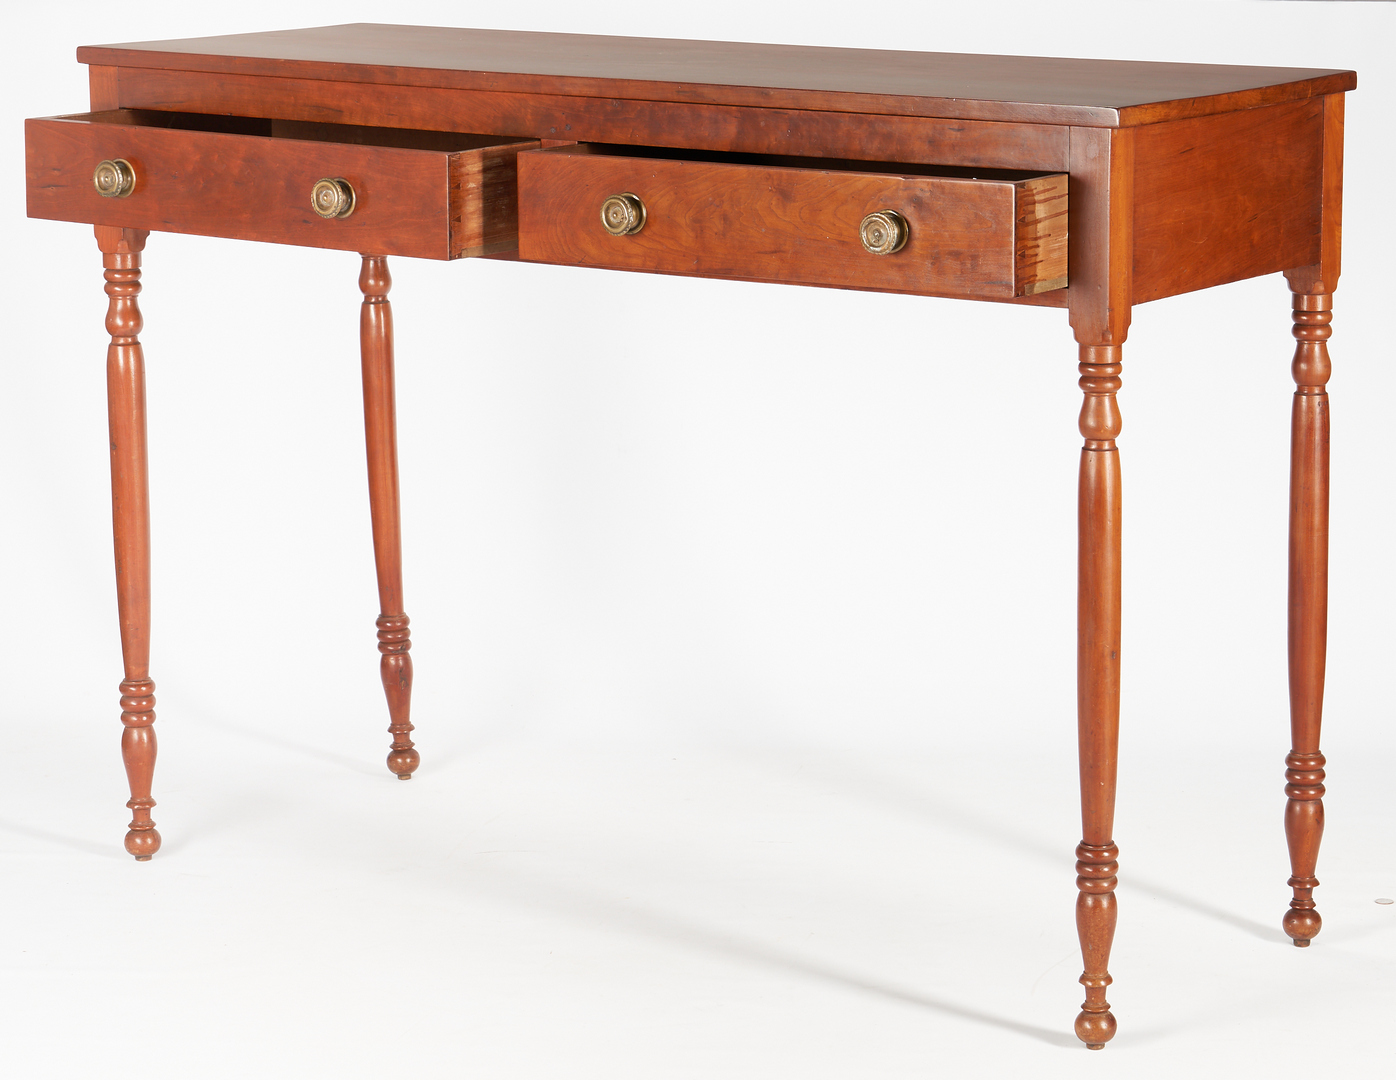 Lot 209: Southern Cherry Huntboard, likely SC